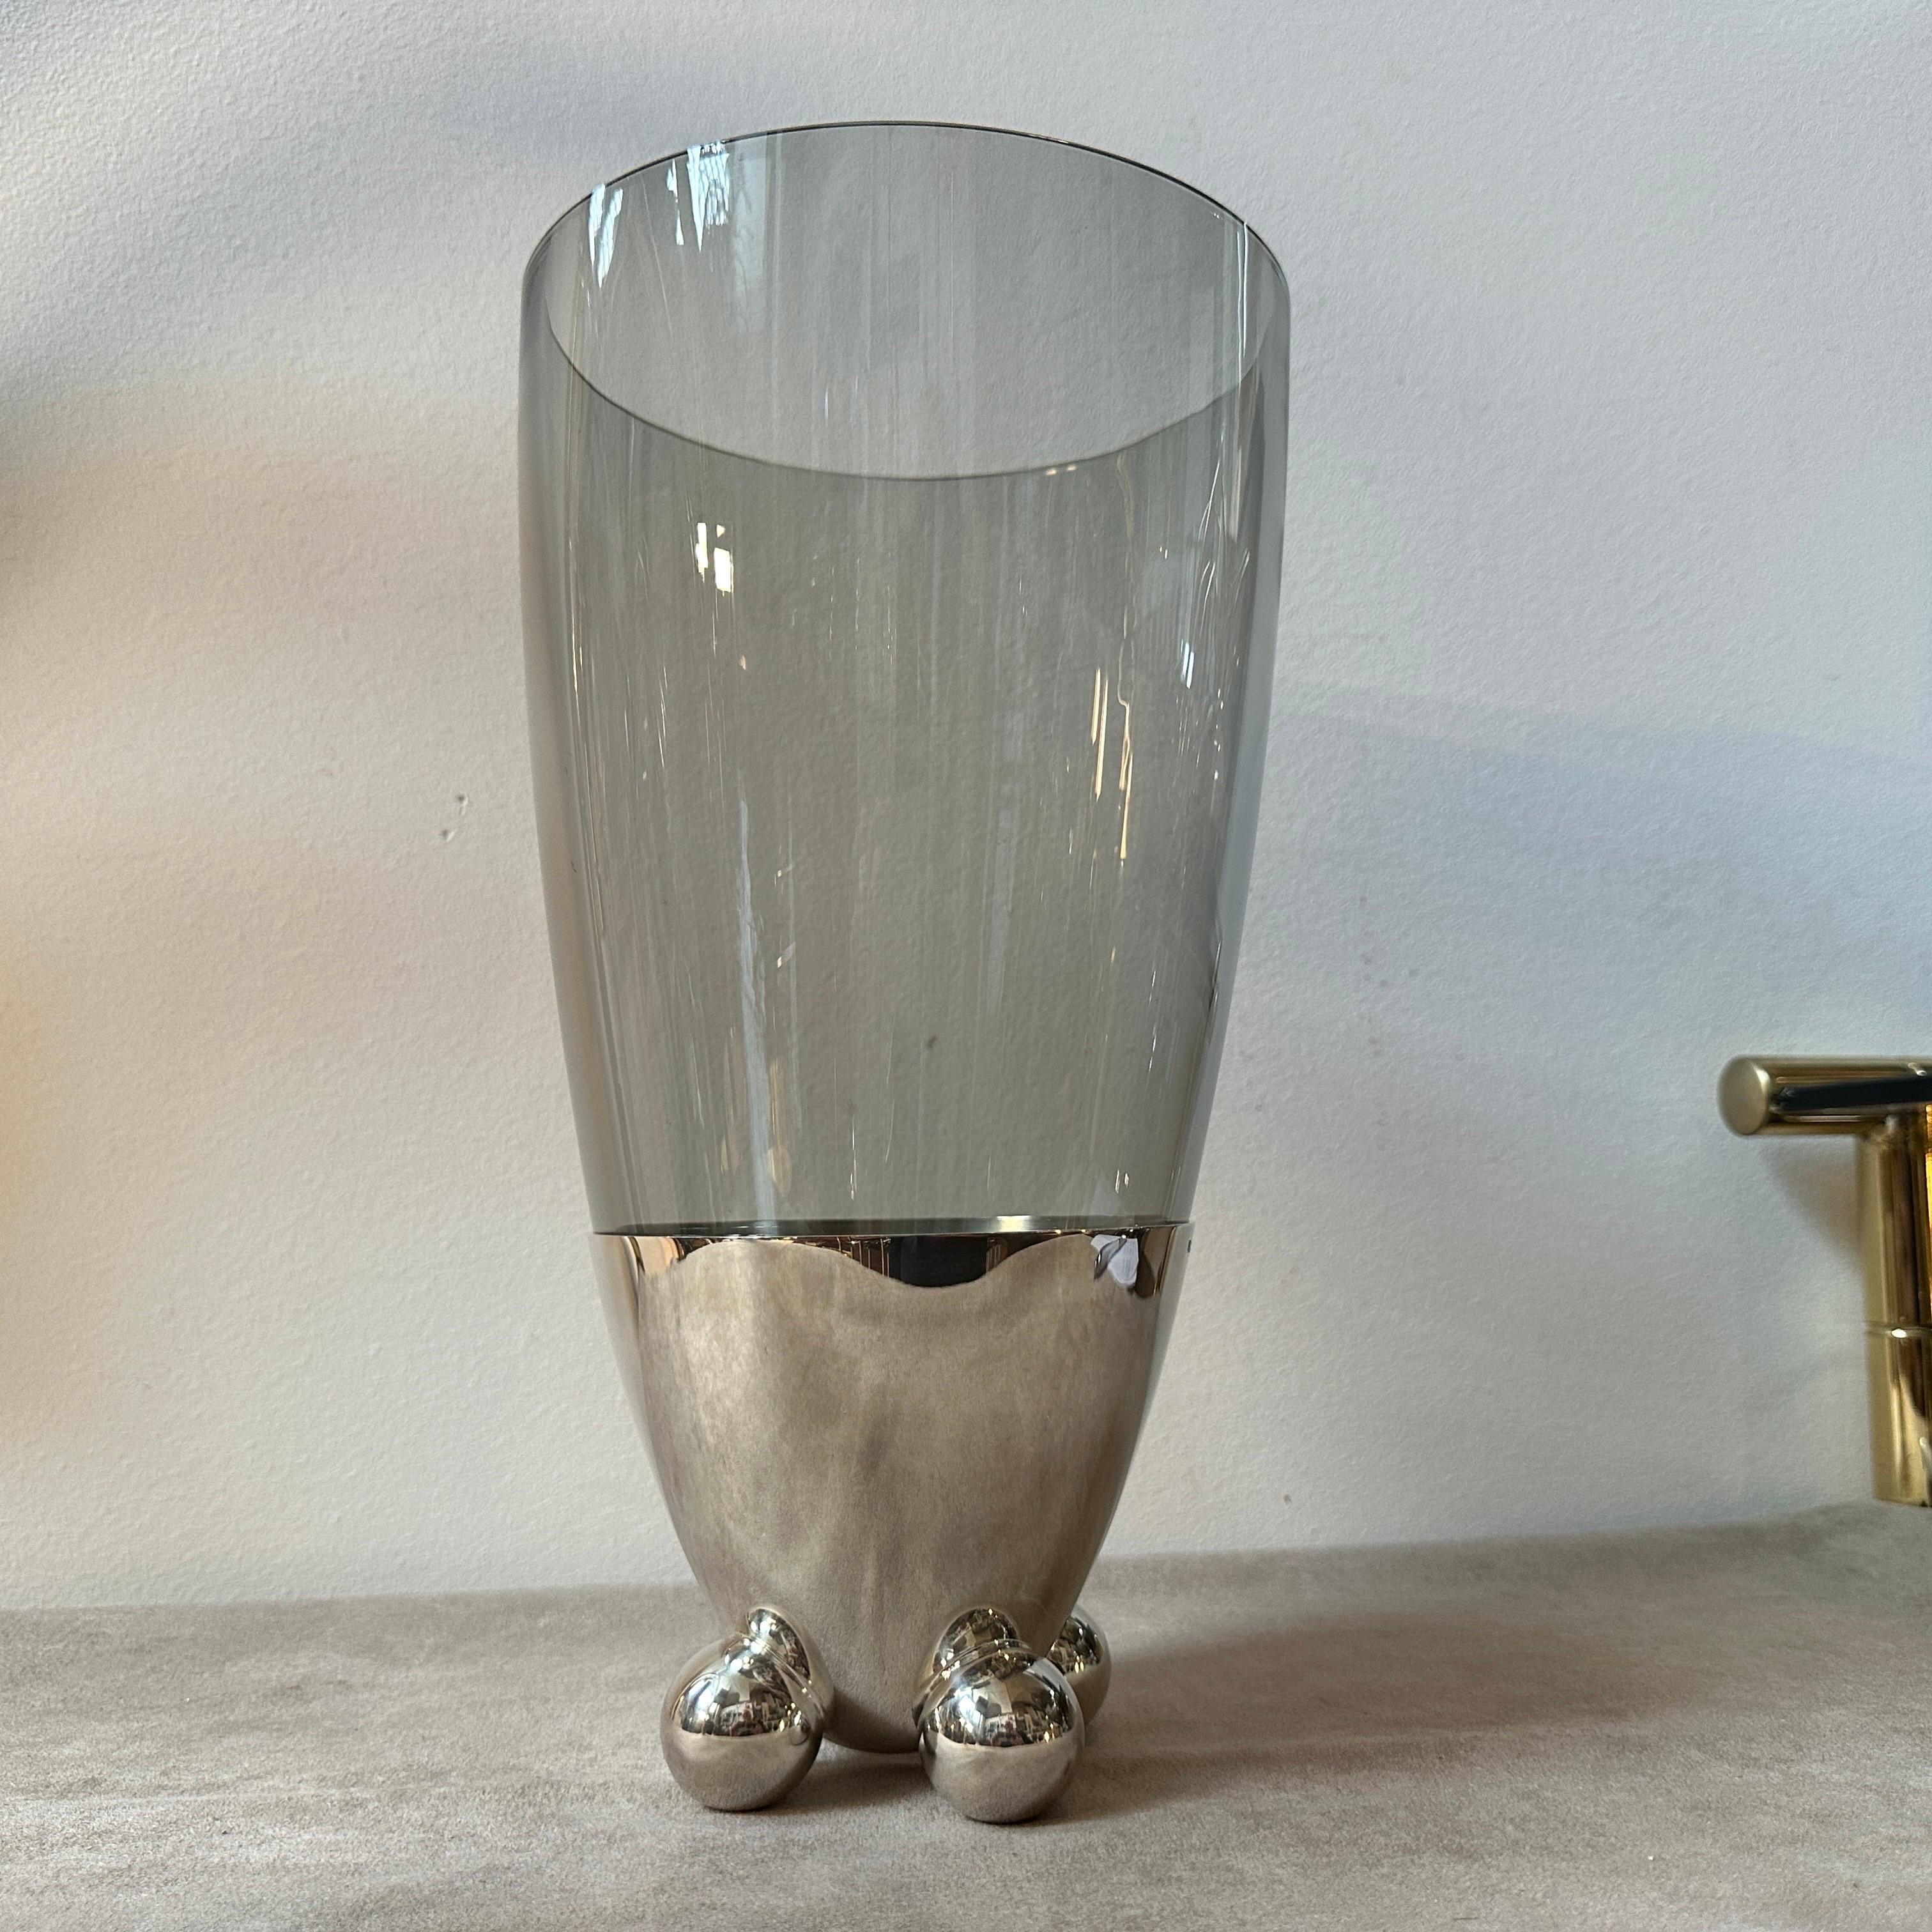 French 1990s Space Age Silver Plated Atomes Vase by Richard Hutten for Christofle For Sale